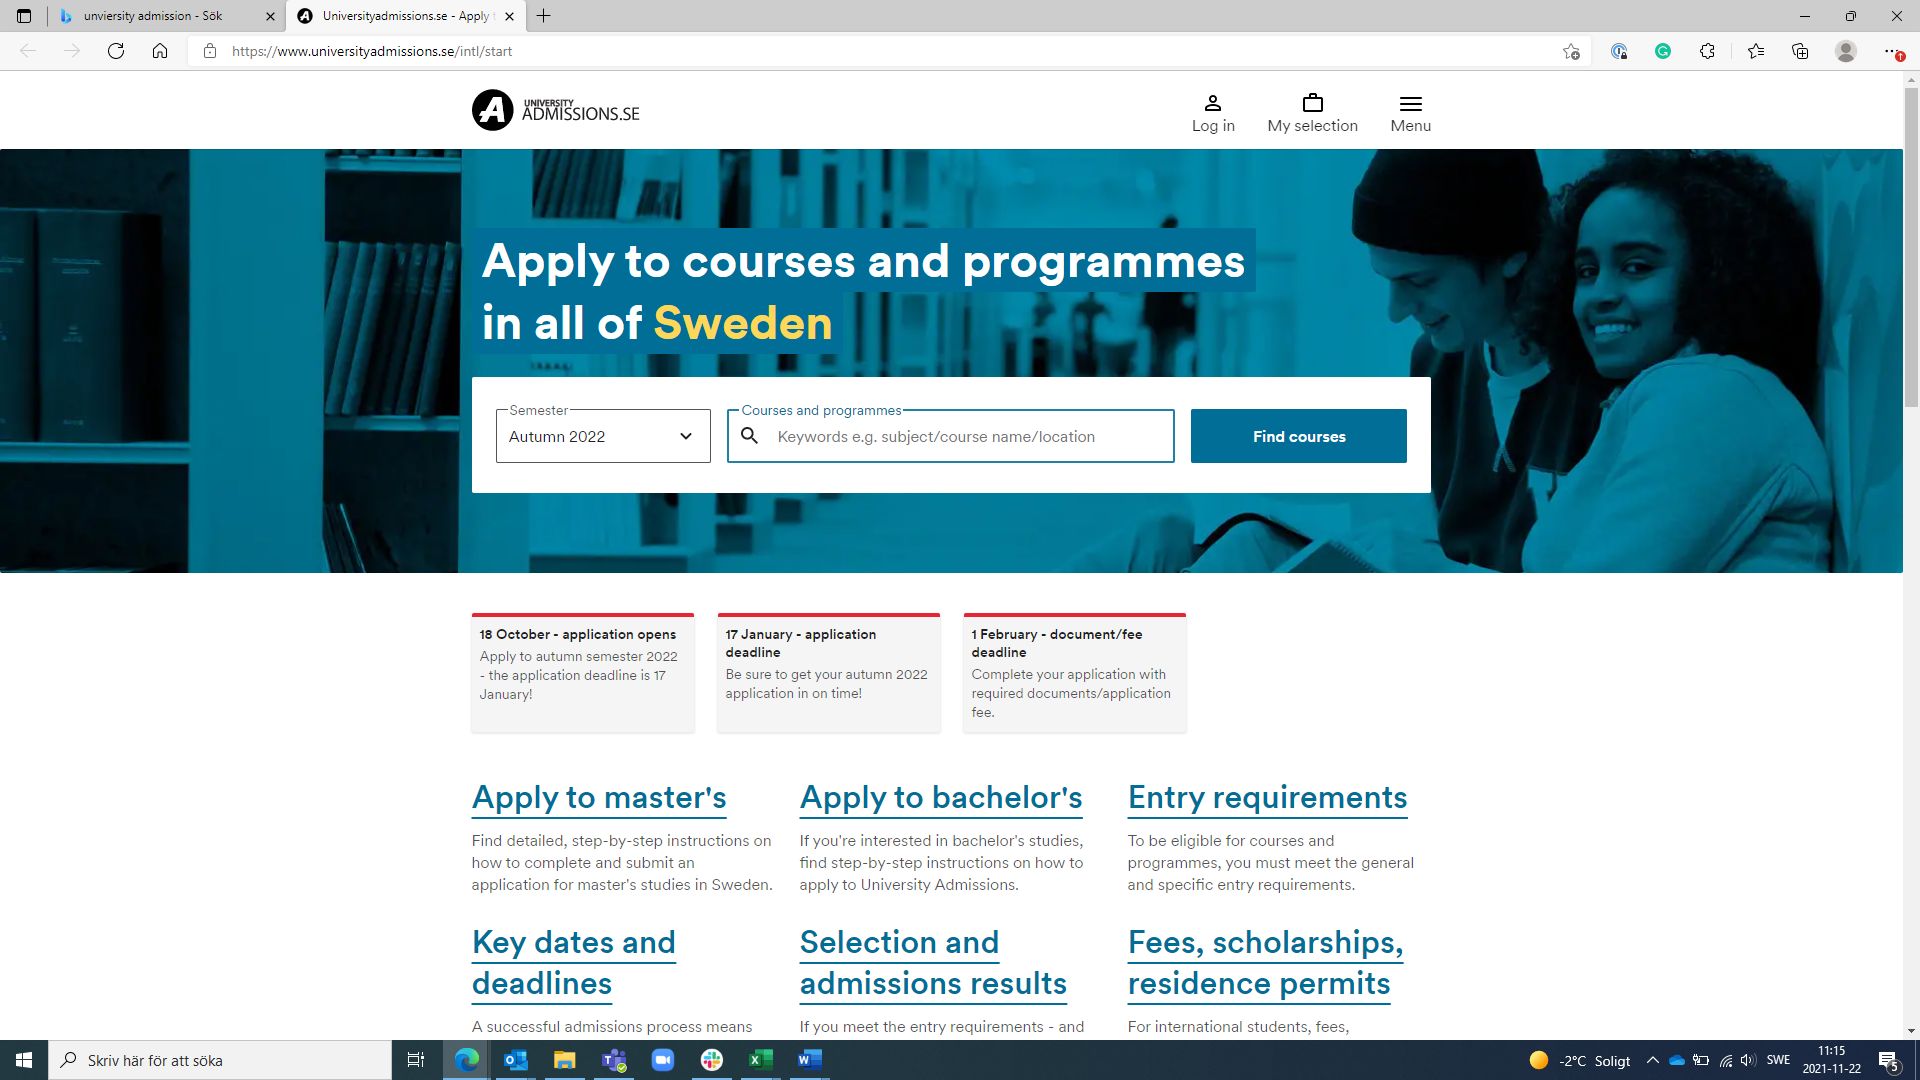 Screenshot of the University Admissions frontpage.